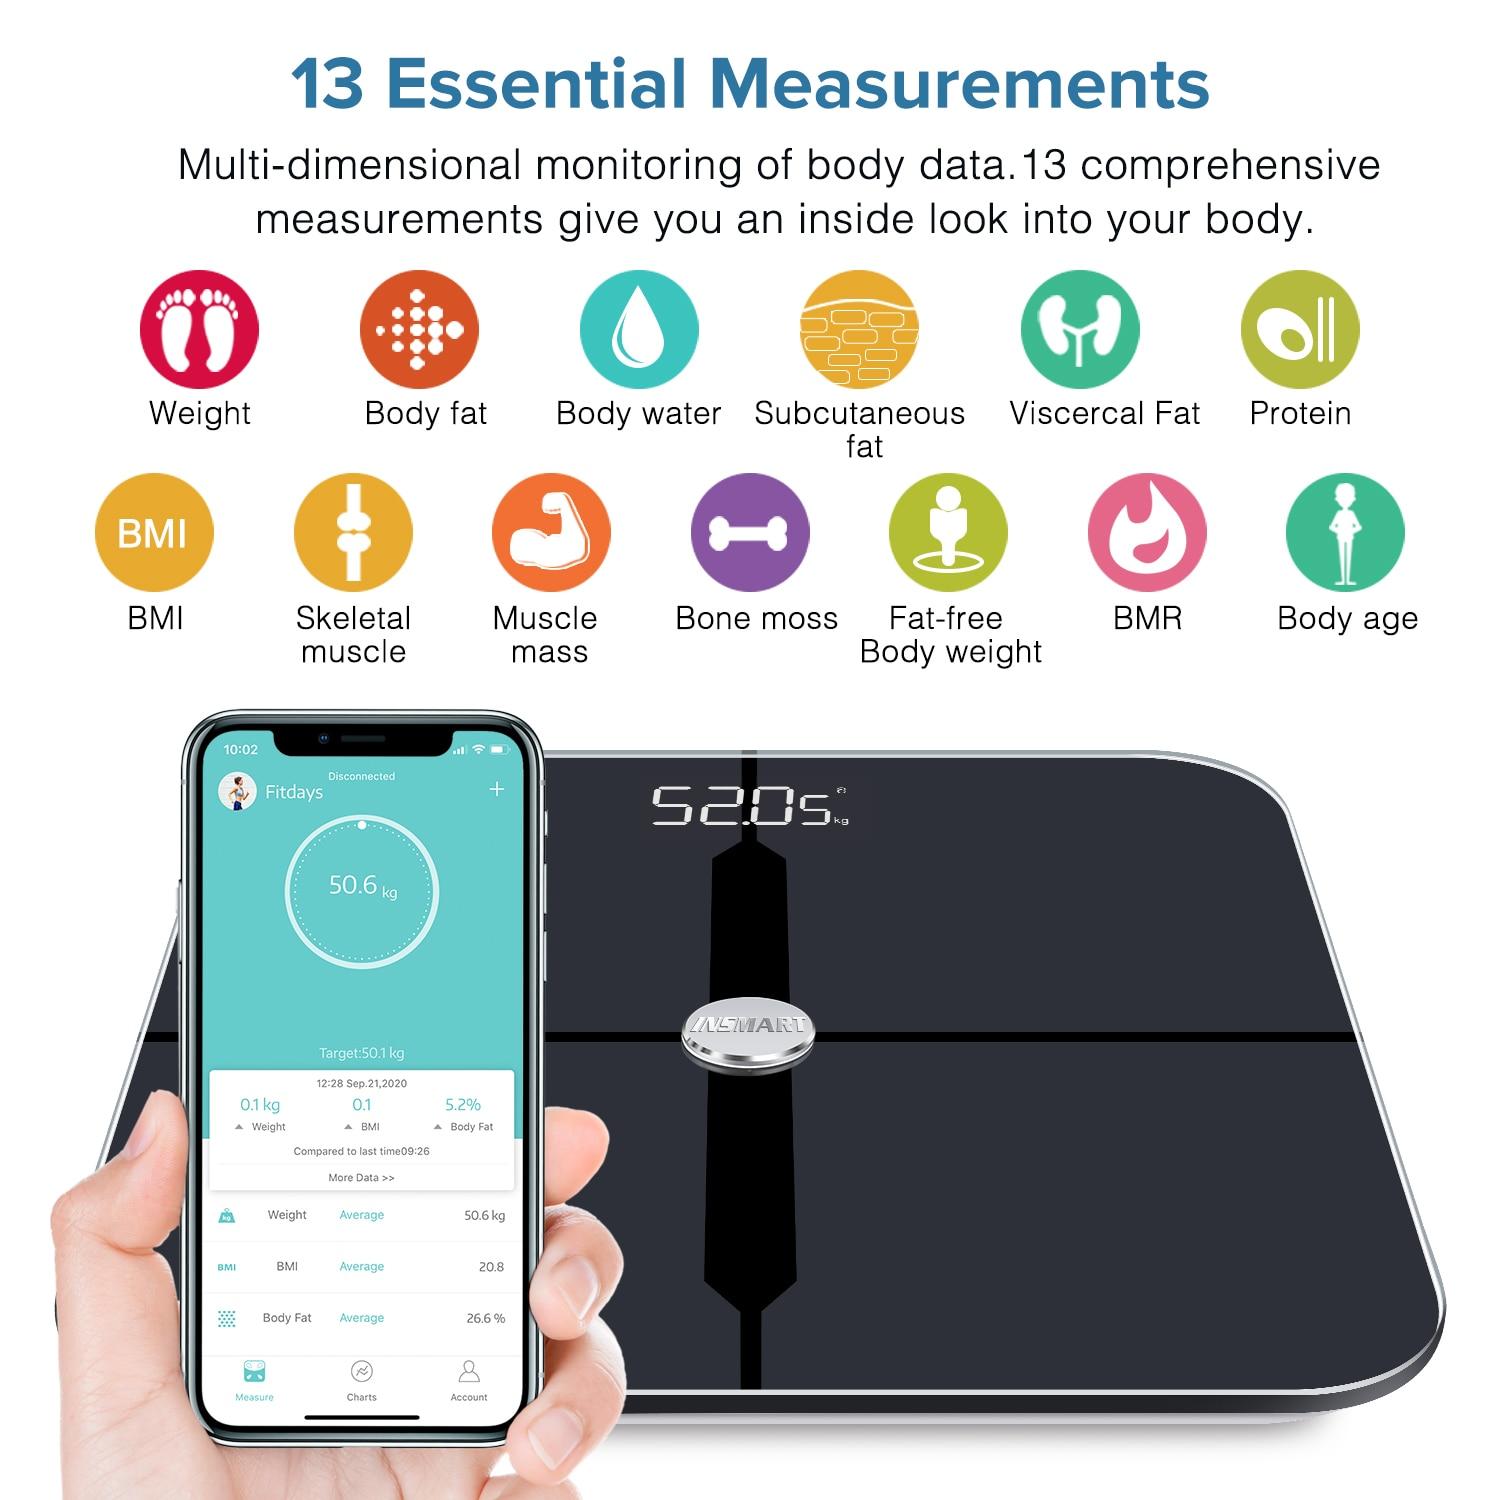 https://tenacityfit.com/wp-content/uploads/2022/12/INSMART-Bathroom-Scale-Digital-Body-Composition-Weight-Scales-Smart-Wireless-Electronic-Fat-Scales-Bluetooth-compatible-1.jpg